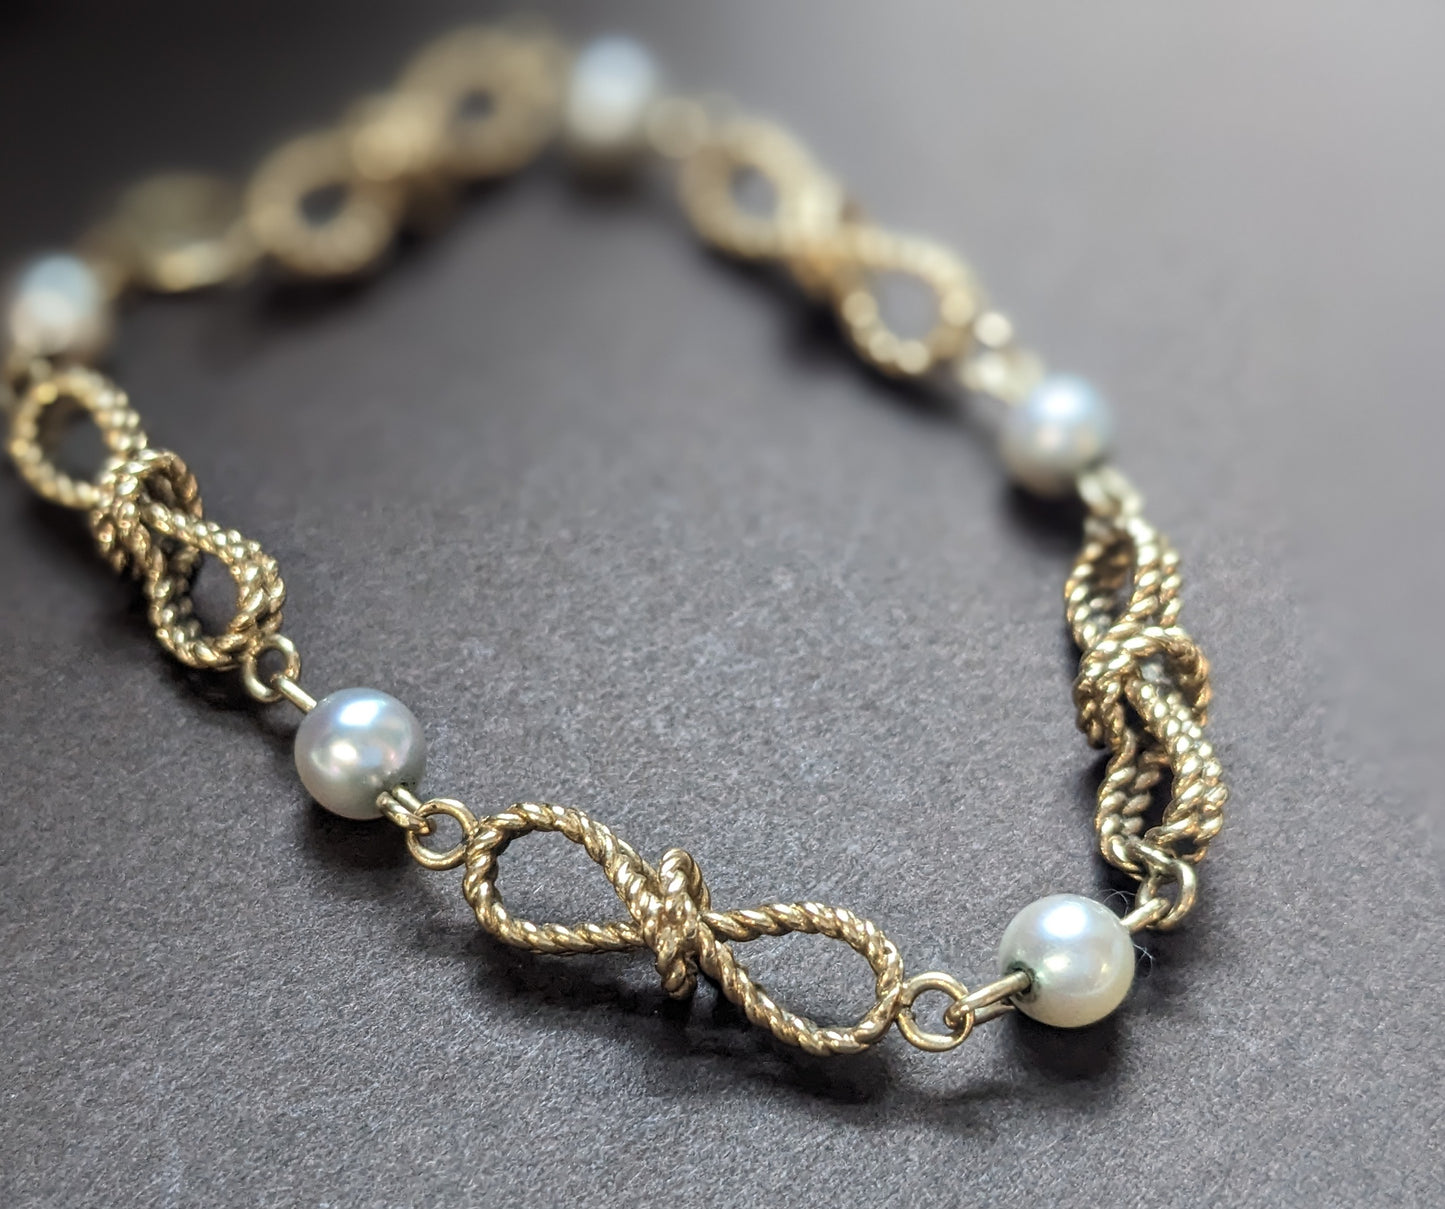 14k rope style bracelet with pearls